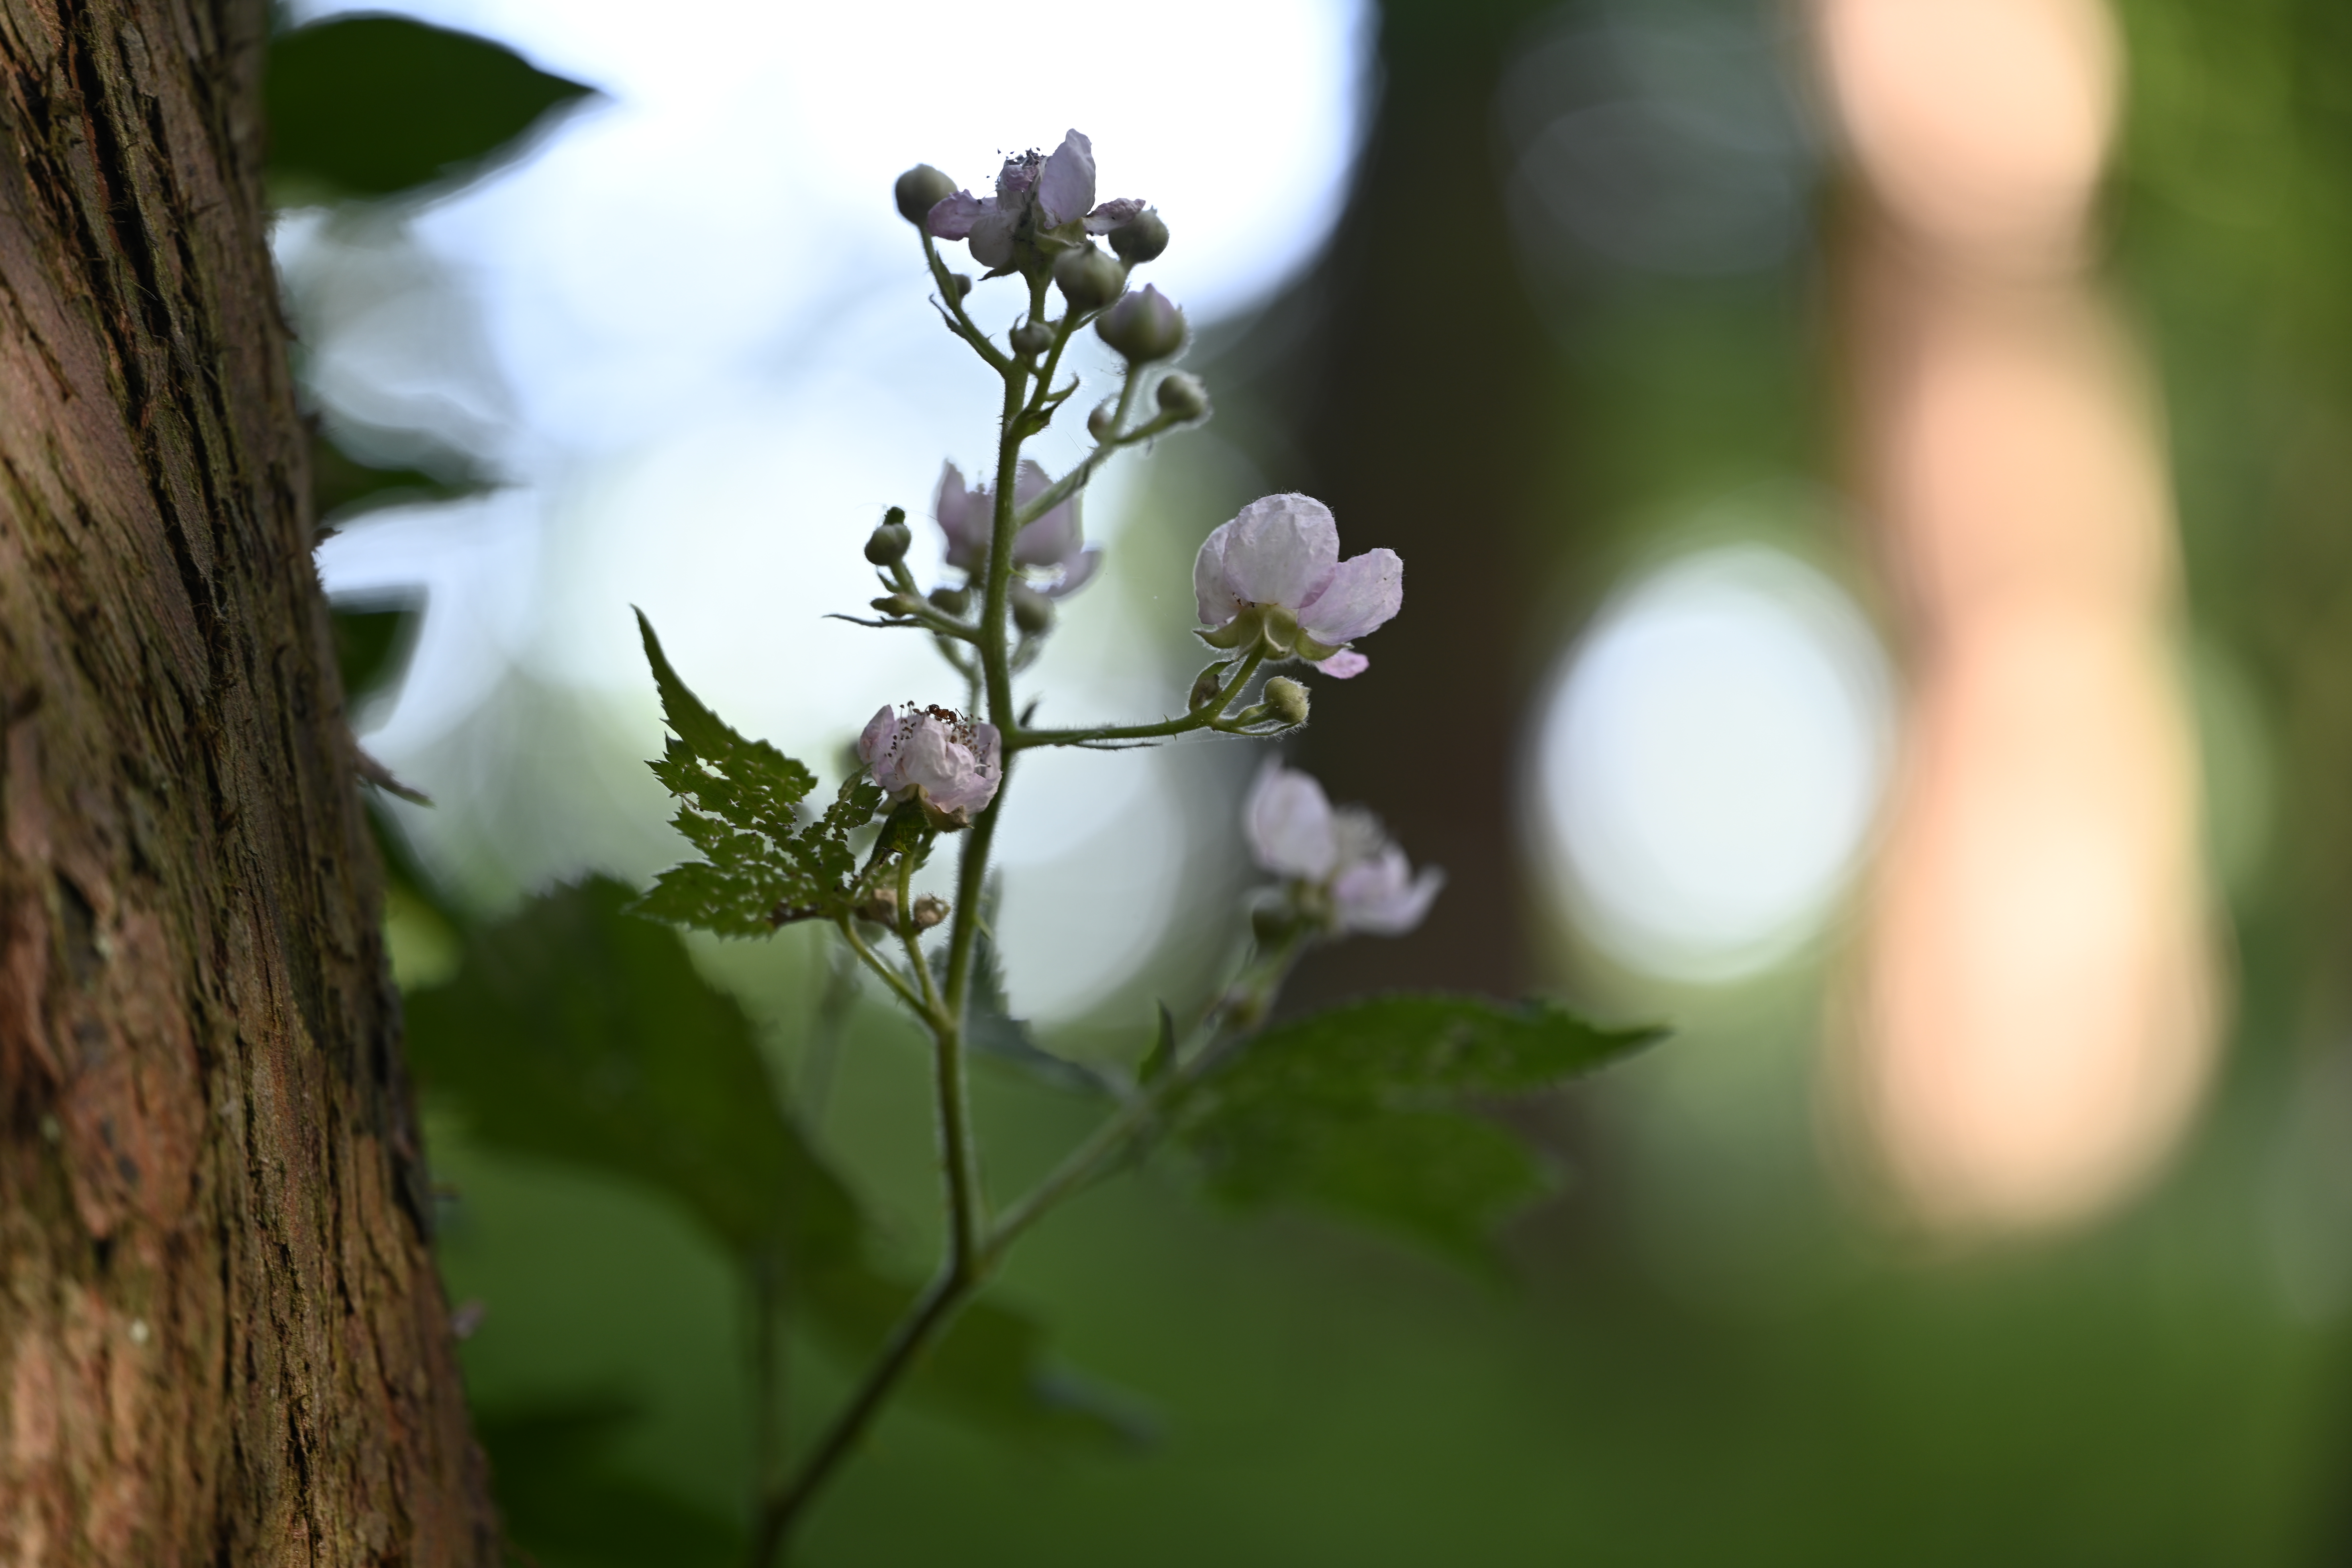 White flowers next to a tree trunk, shot on the Nikon Nikkor Z MC 105mm f/2.8 VR S